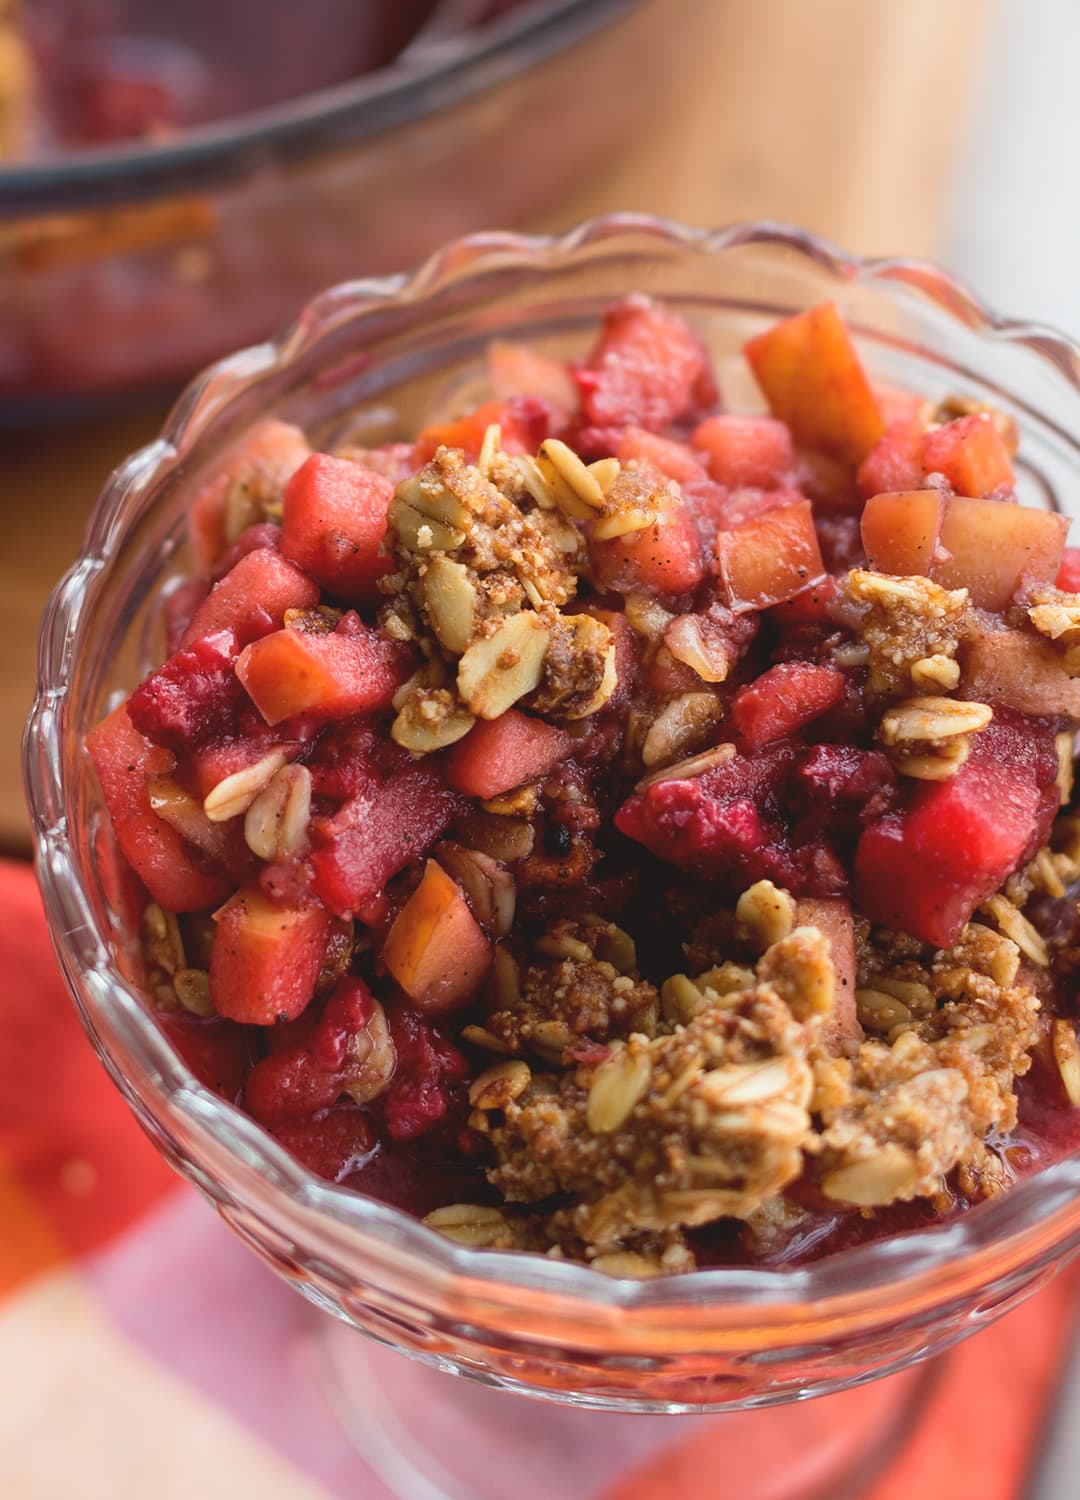 Cardamom Raspberry Apple Crumble - delicious and healthy twist on regular apple crumble. The cardamom with combination with the raspberries give it a great flavor and the oats a great crunch. (Vegan and Gluten-free!) | thehealthfulideas.com